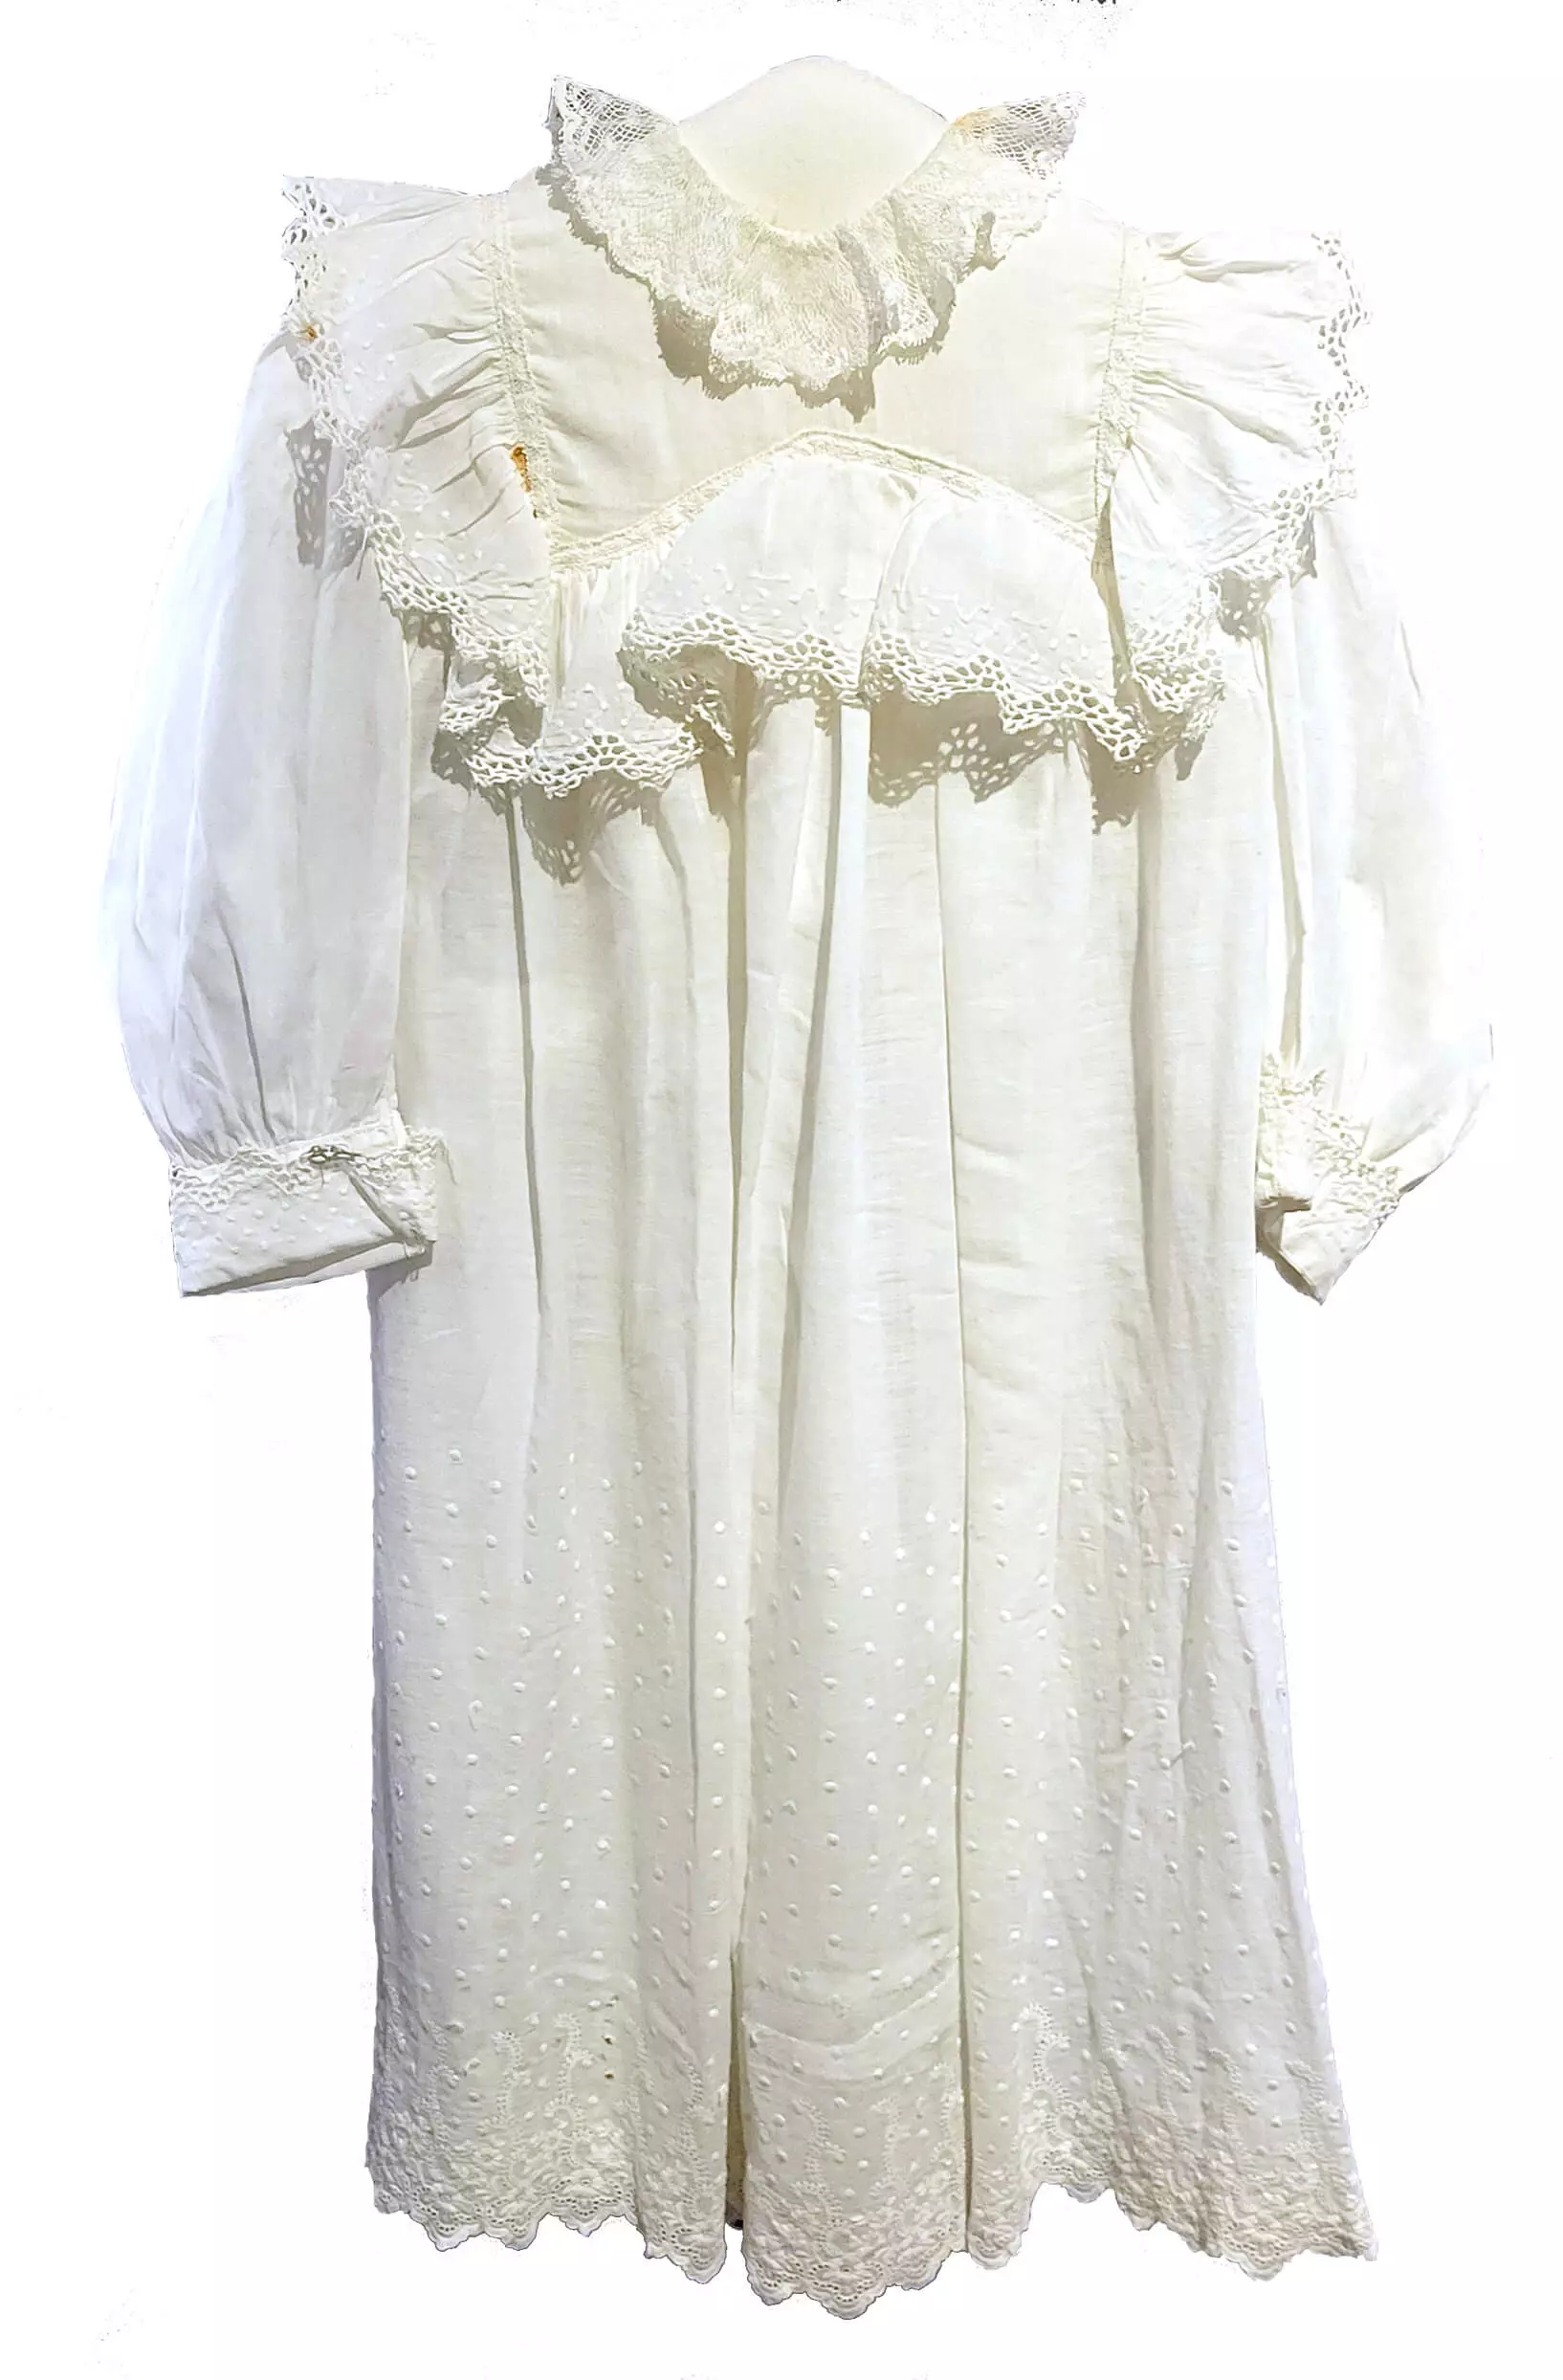 A frilly white long-sleeved dress with lace around the shoulders and neck.